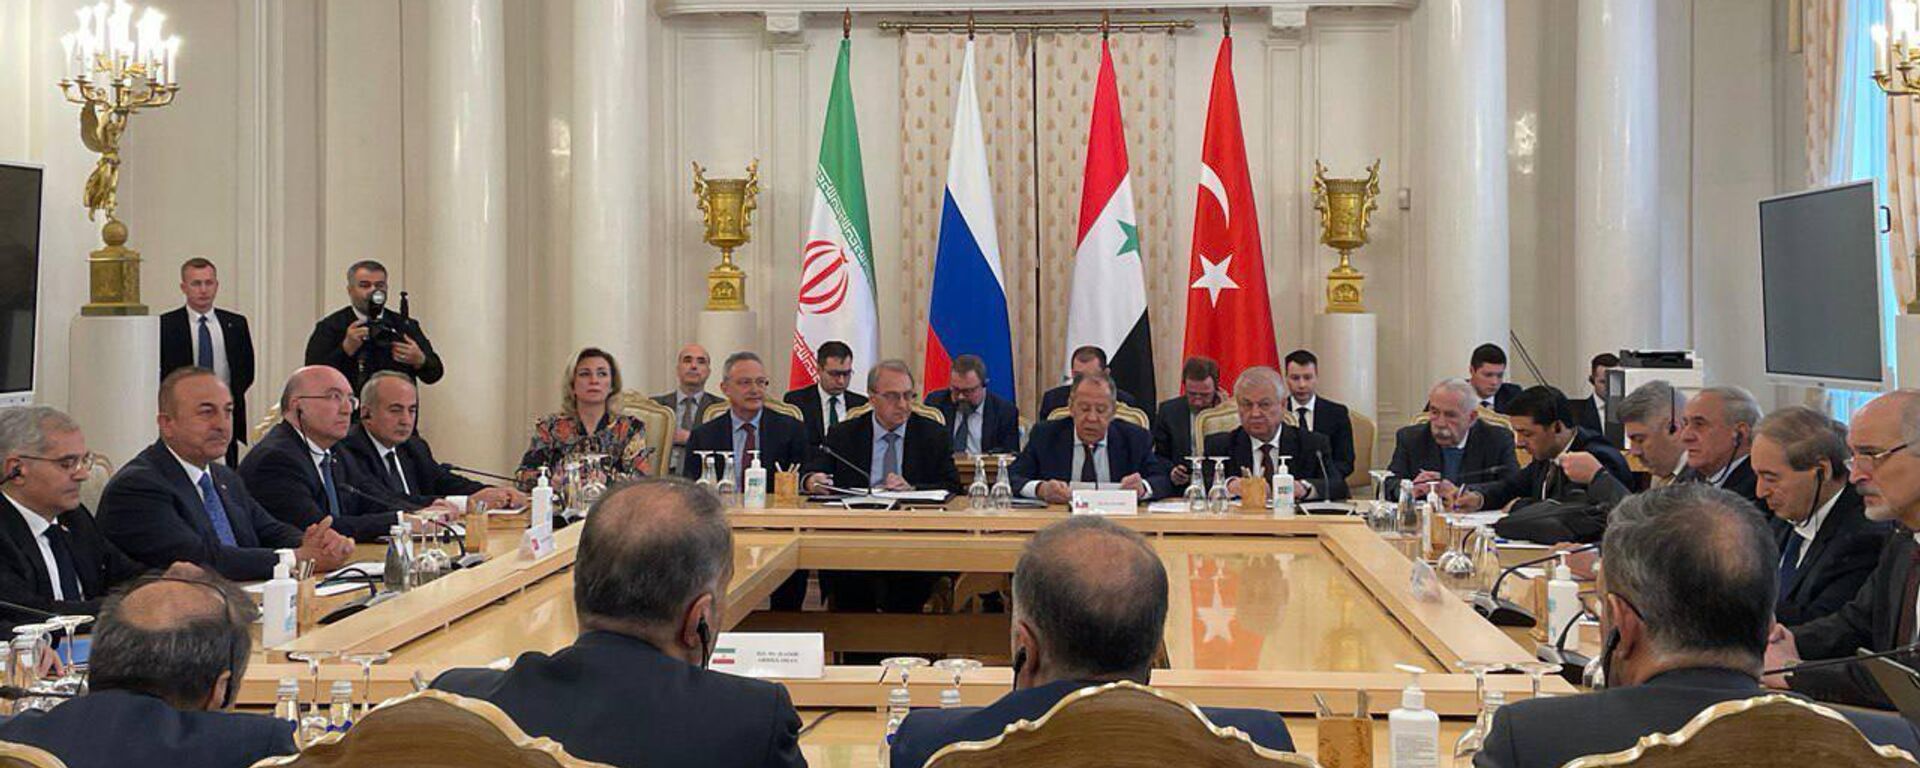 Lavrov Meets With Iranian, Turkish, Syrian Counterparts in Moscow - Sputnik International, 1920, 10.05.2023